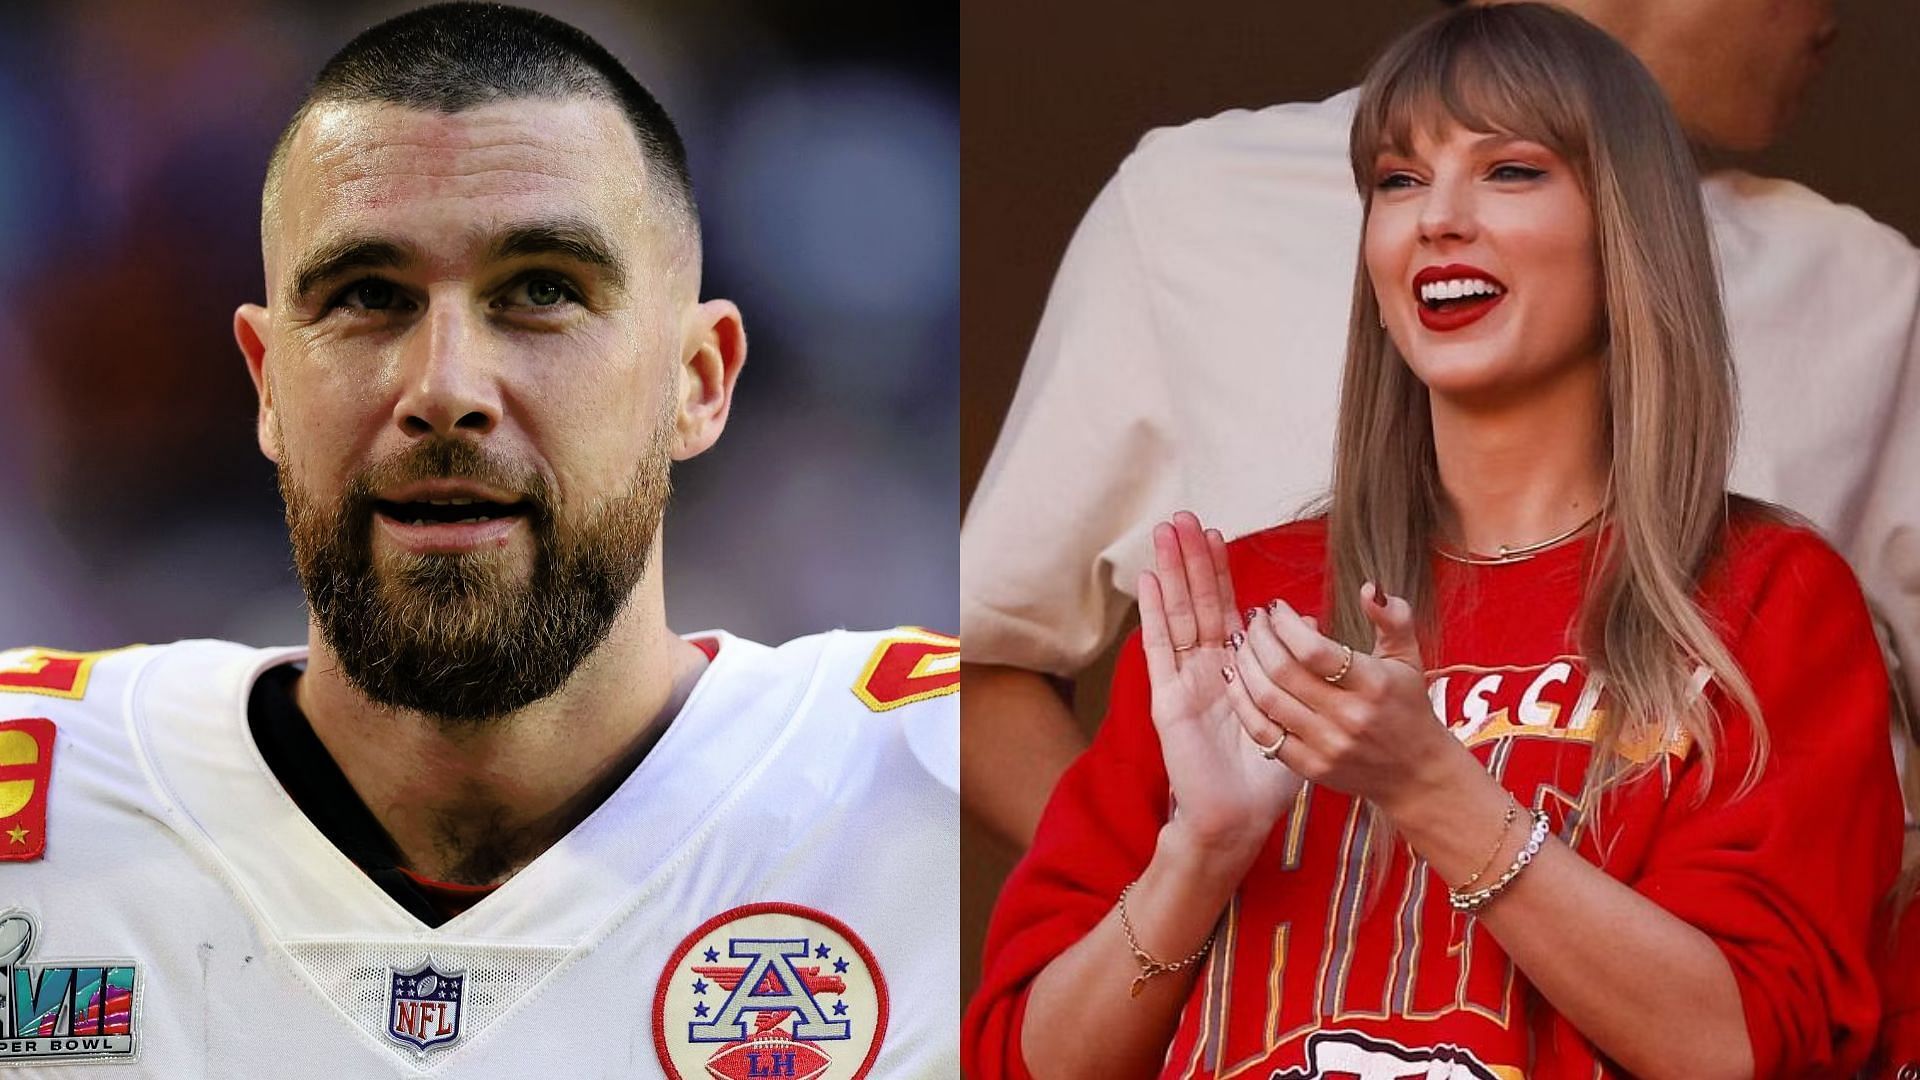 All-Pro tight end Travis Kelce and 12-time Grammy Award winner Taylor Swift